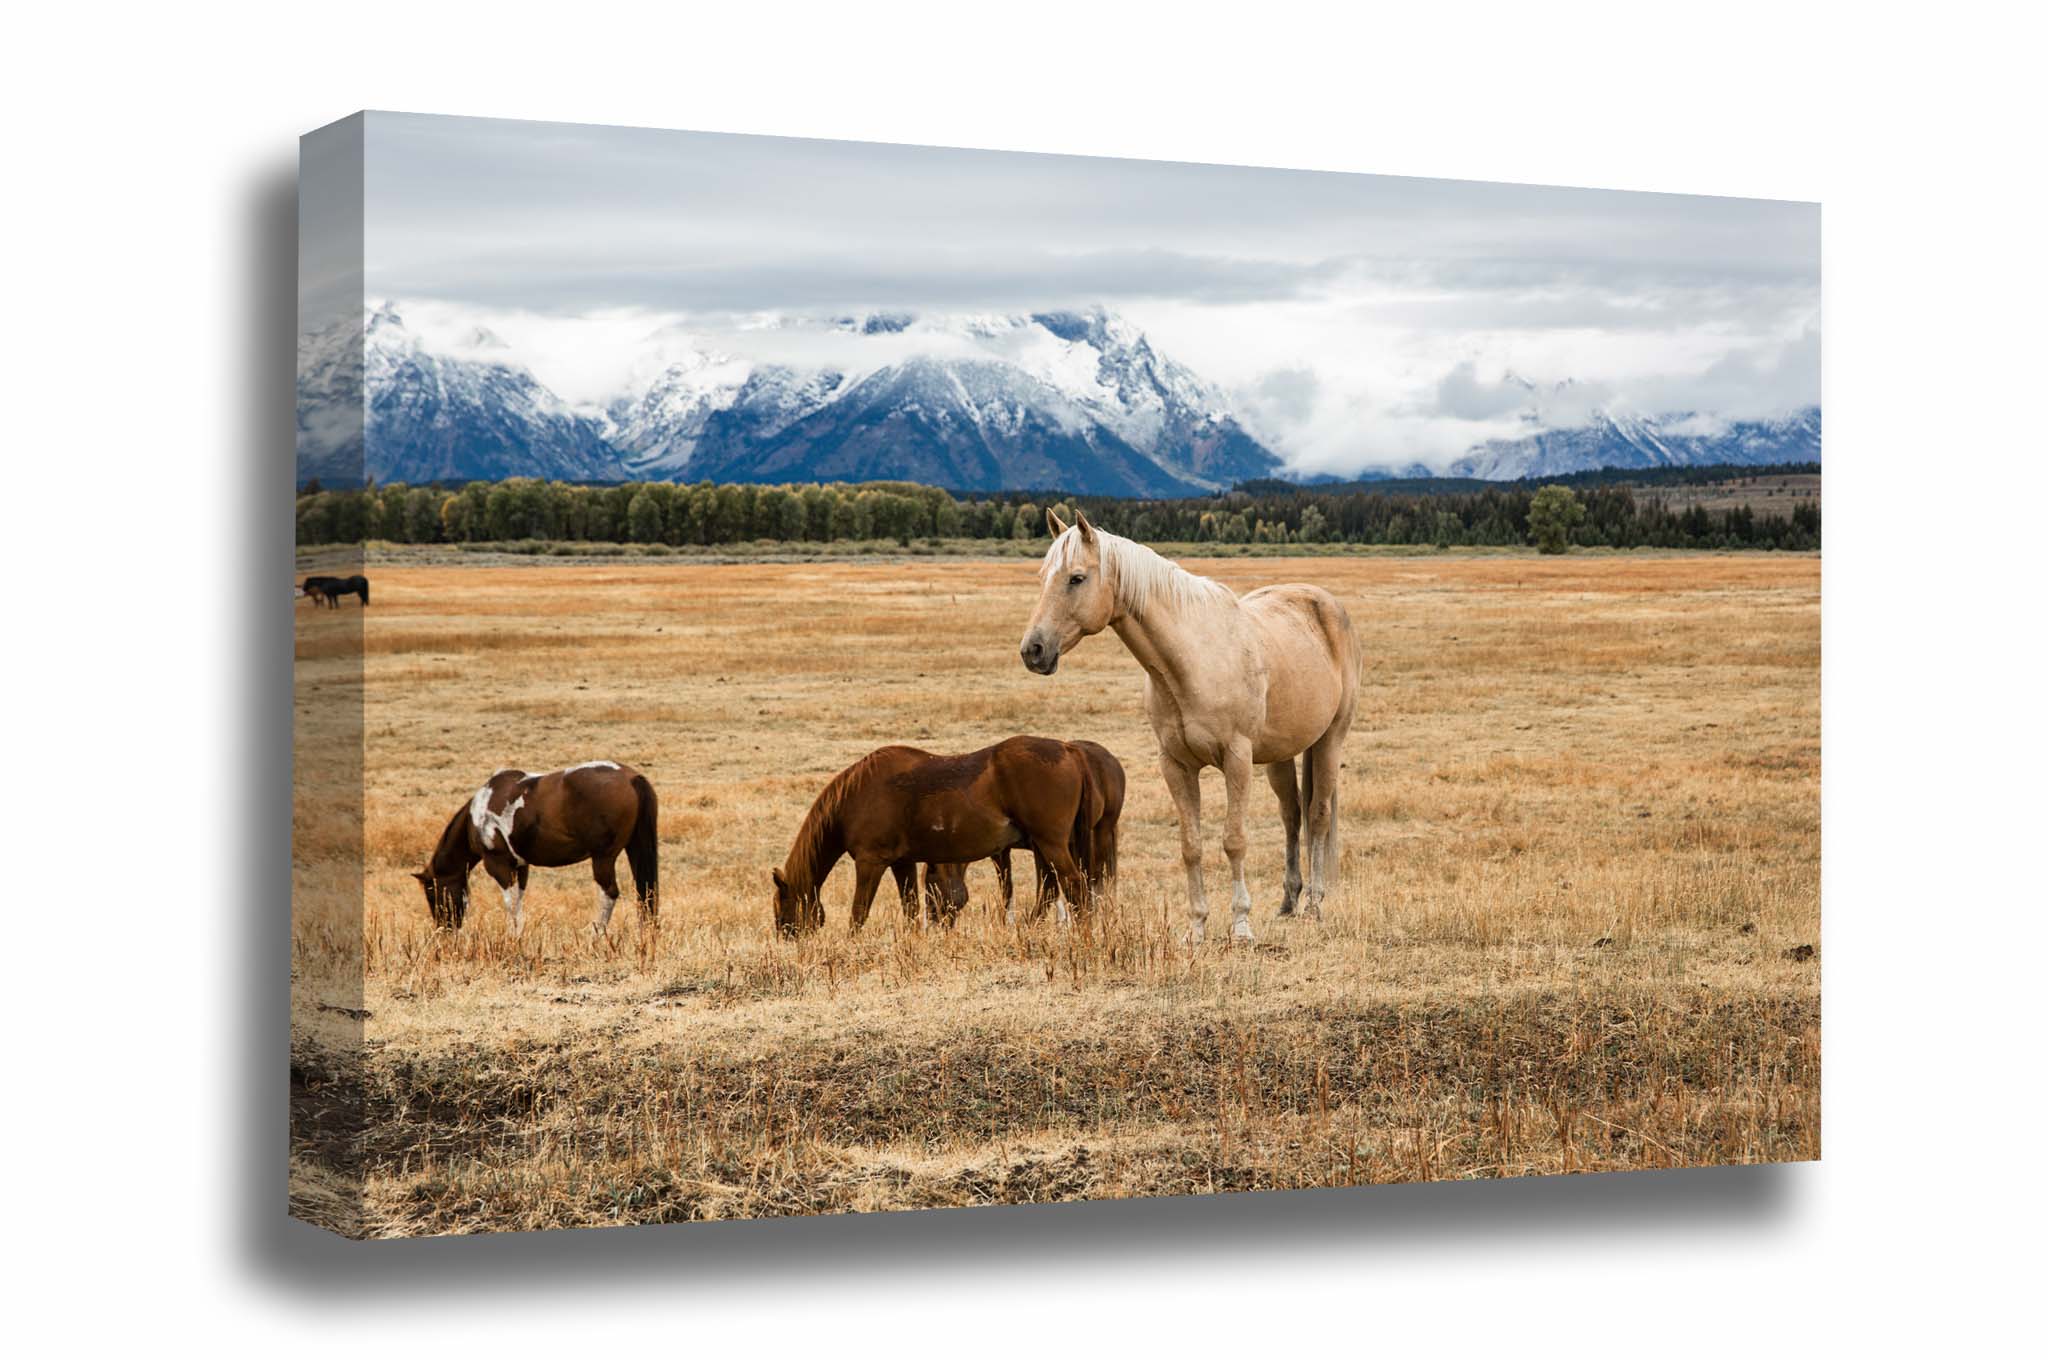 Equine canvas wall art of a palomino horse on an autumn day in Grand Teton National Park, Wyoming by Sean Ramsey of Southern Plains Photography.